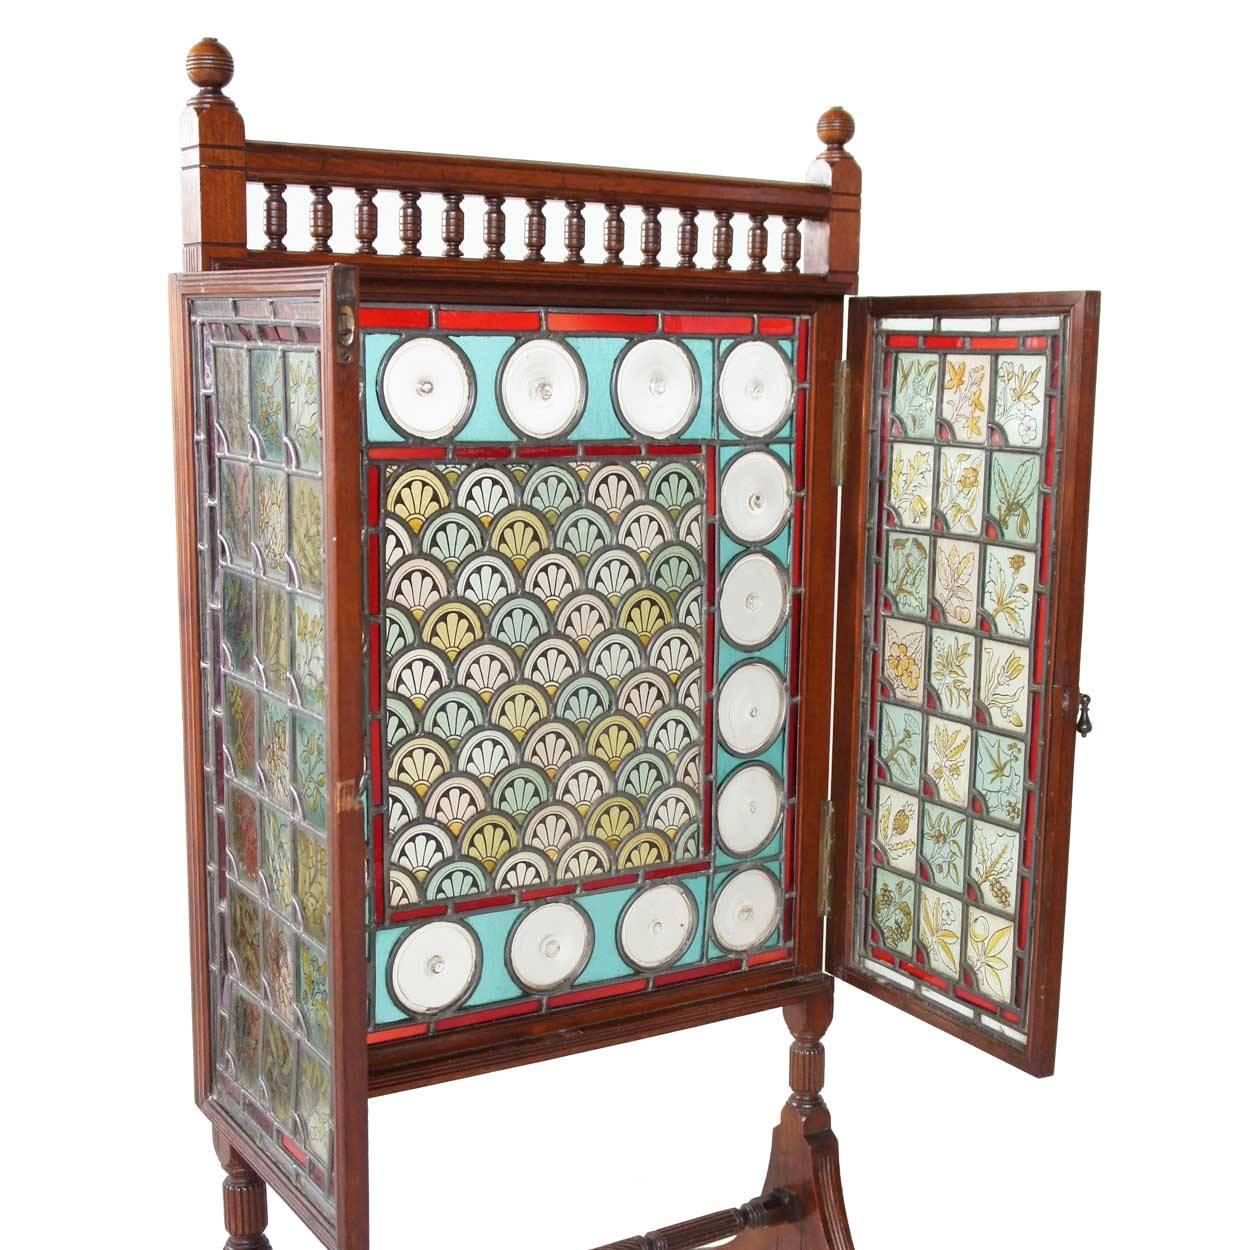 Attributed to Cox & Sons (England, 1837-81)
In the style of William Morris, this antique leaded and painted glass fire screen was made by Cox & Sons, who were ecclesiastical stained glass designers and furniture makers. Notice the hand painted